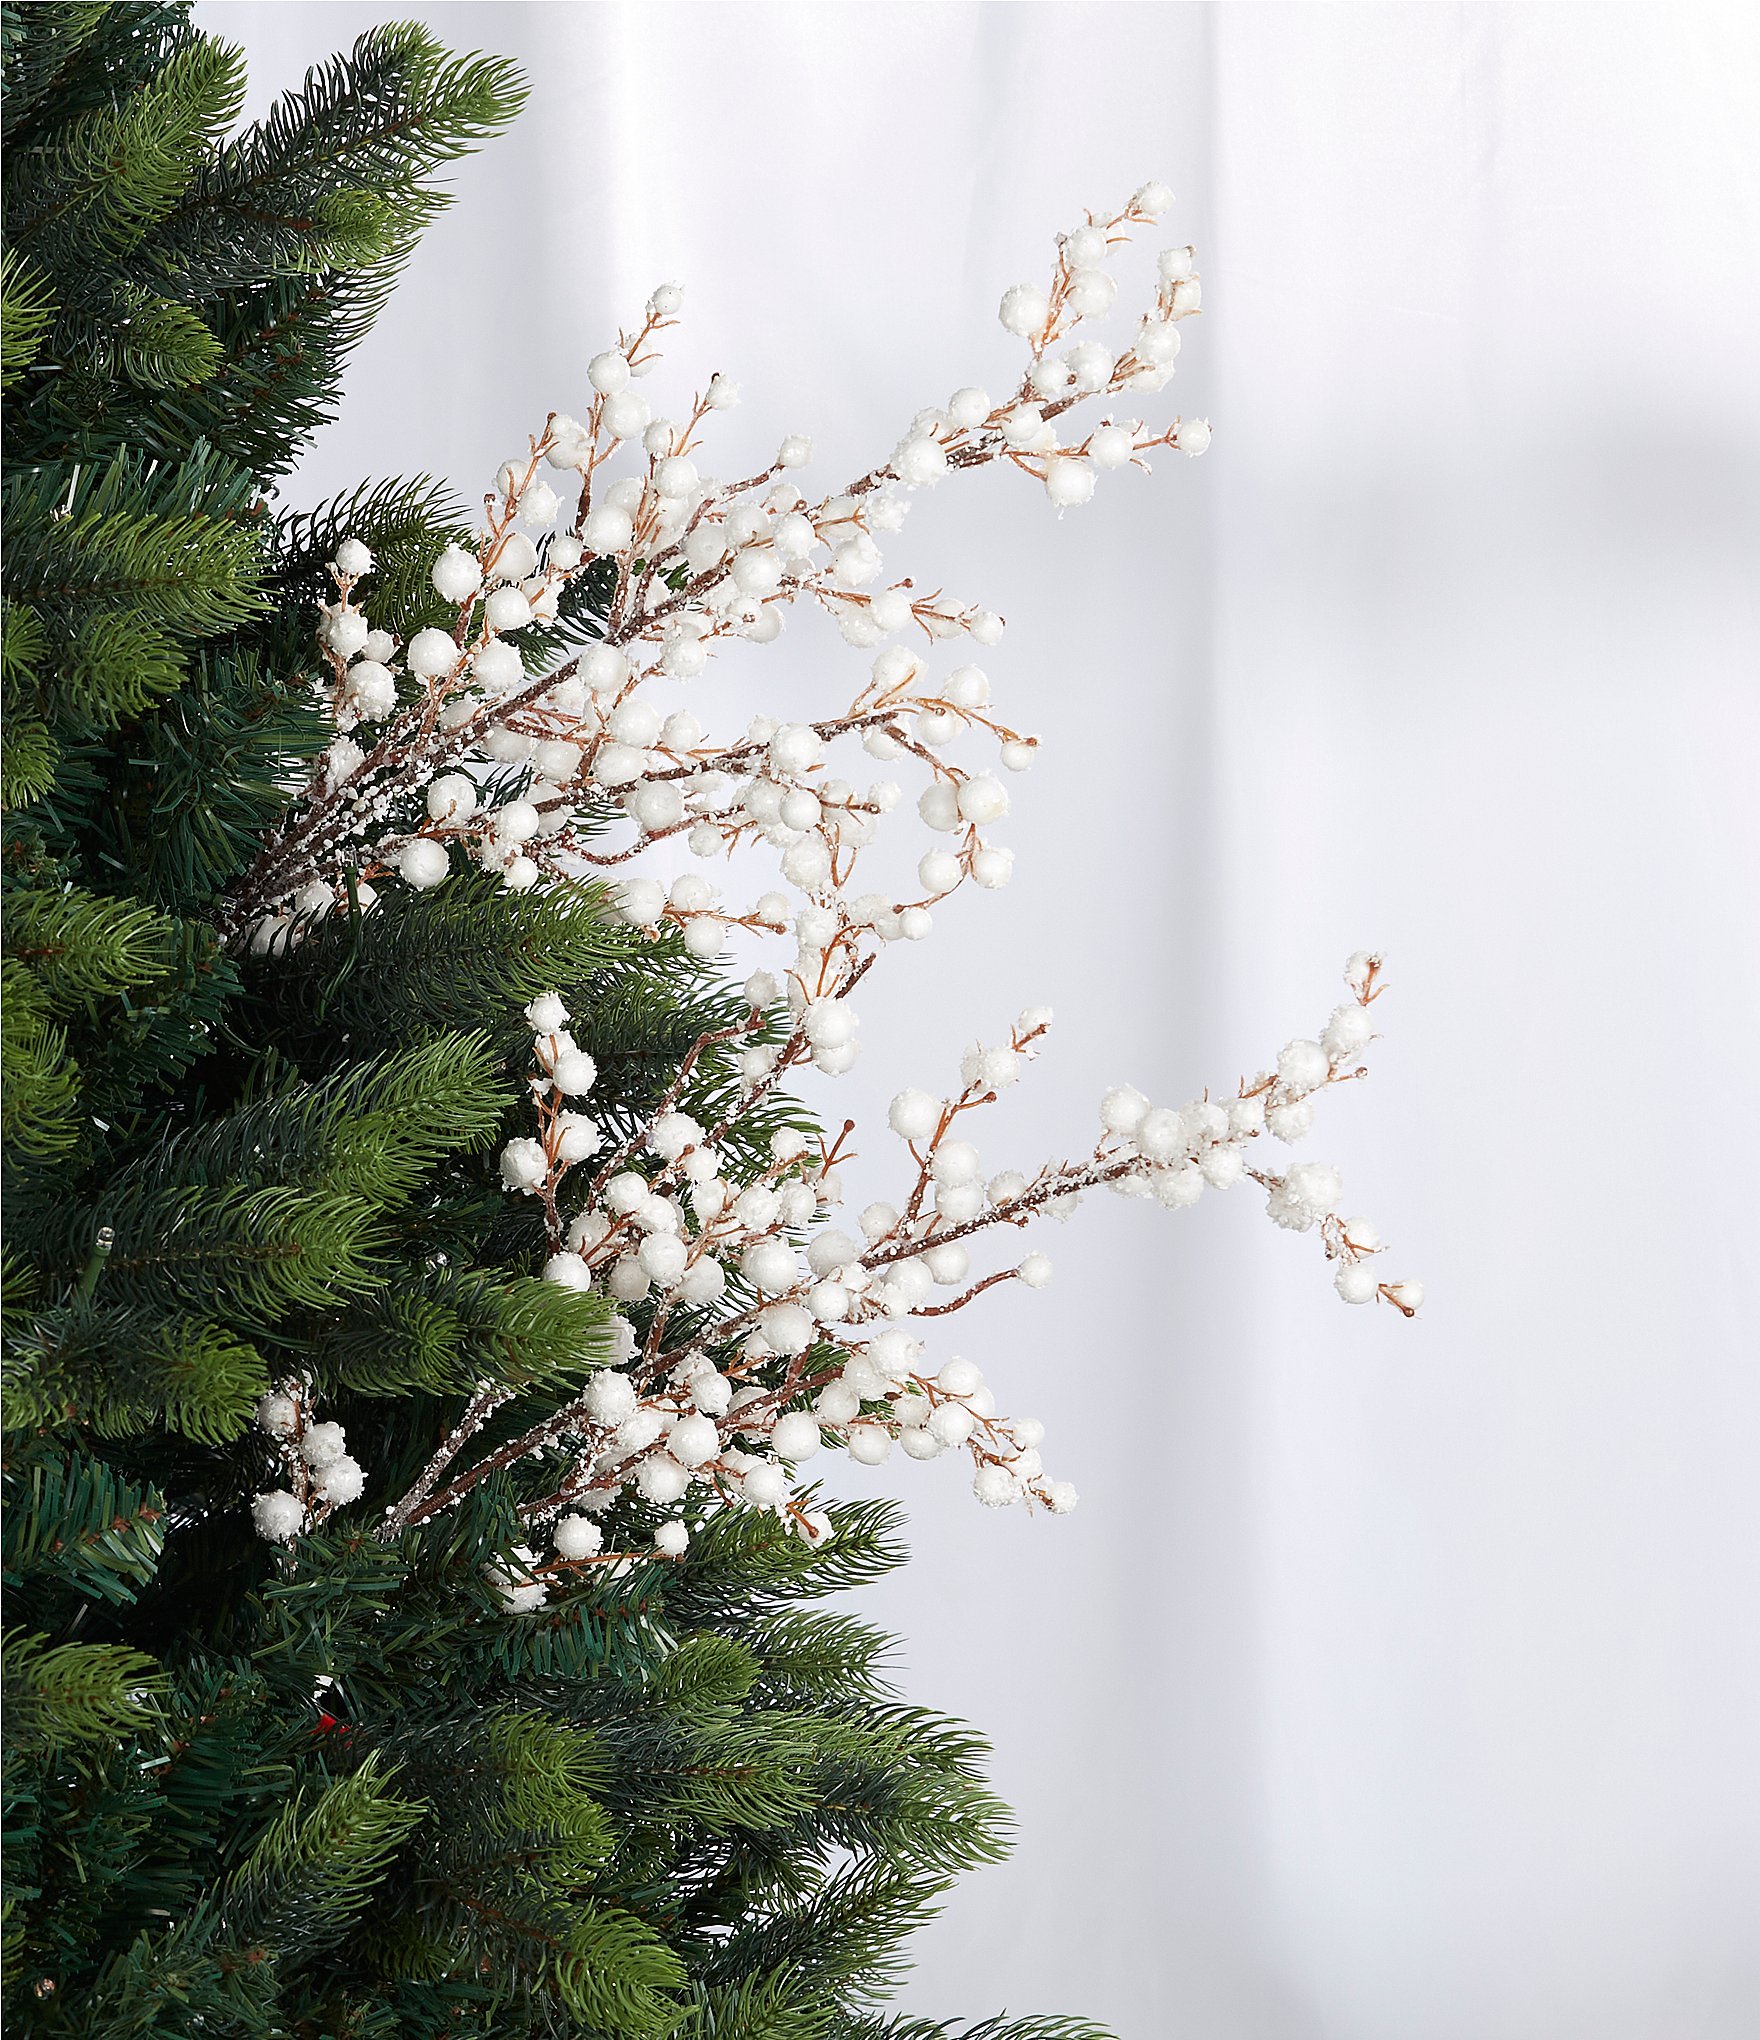 https://dimg.dillards.com/is/image/DillardsZoom/zoom/southern-living-holly-jolly-collection-white-snowed-berry-branch-pick-2-piece-set/00000000_zi_20390070.jpg